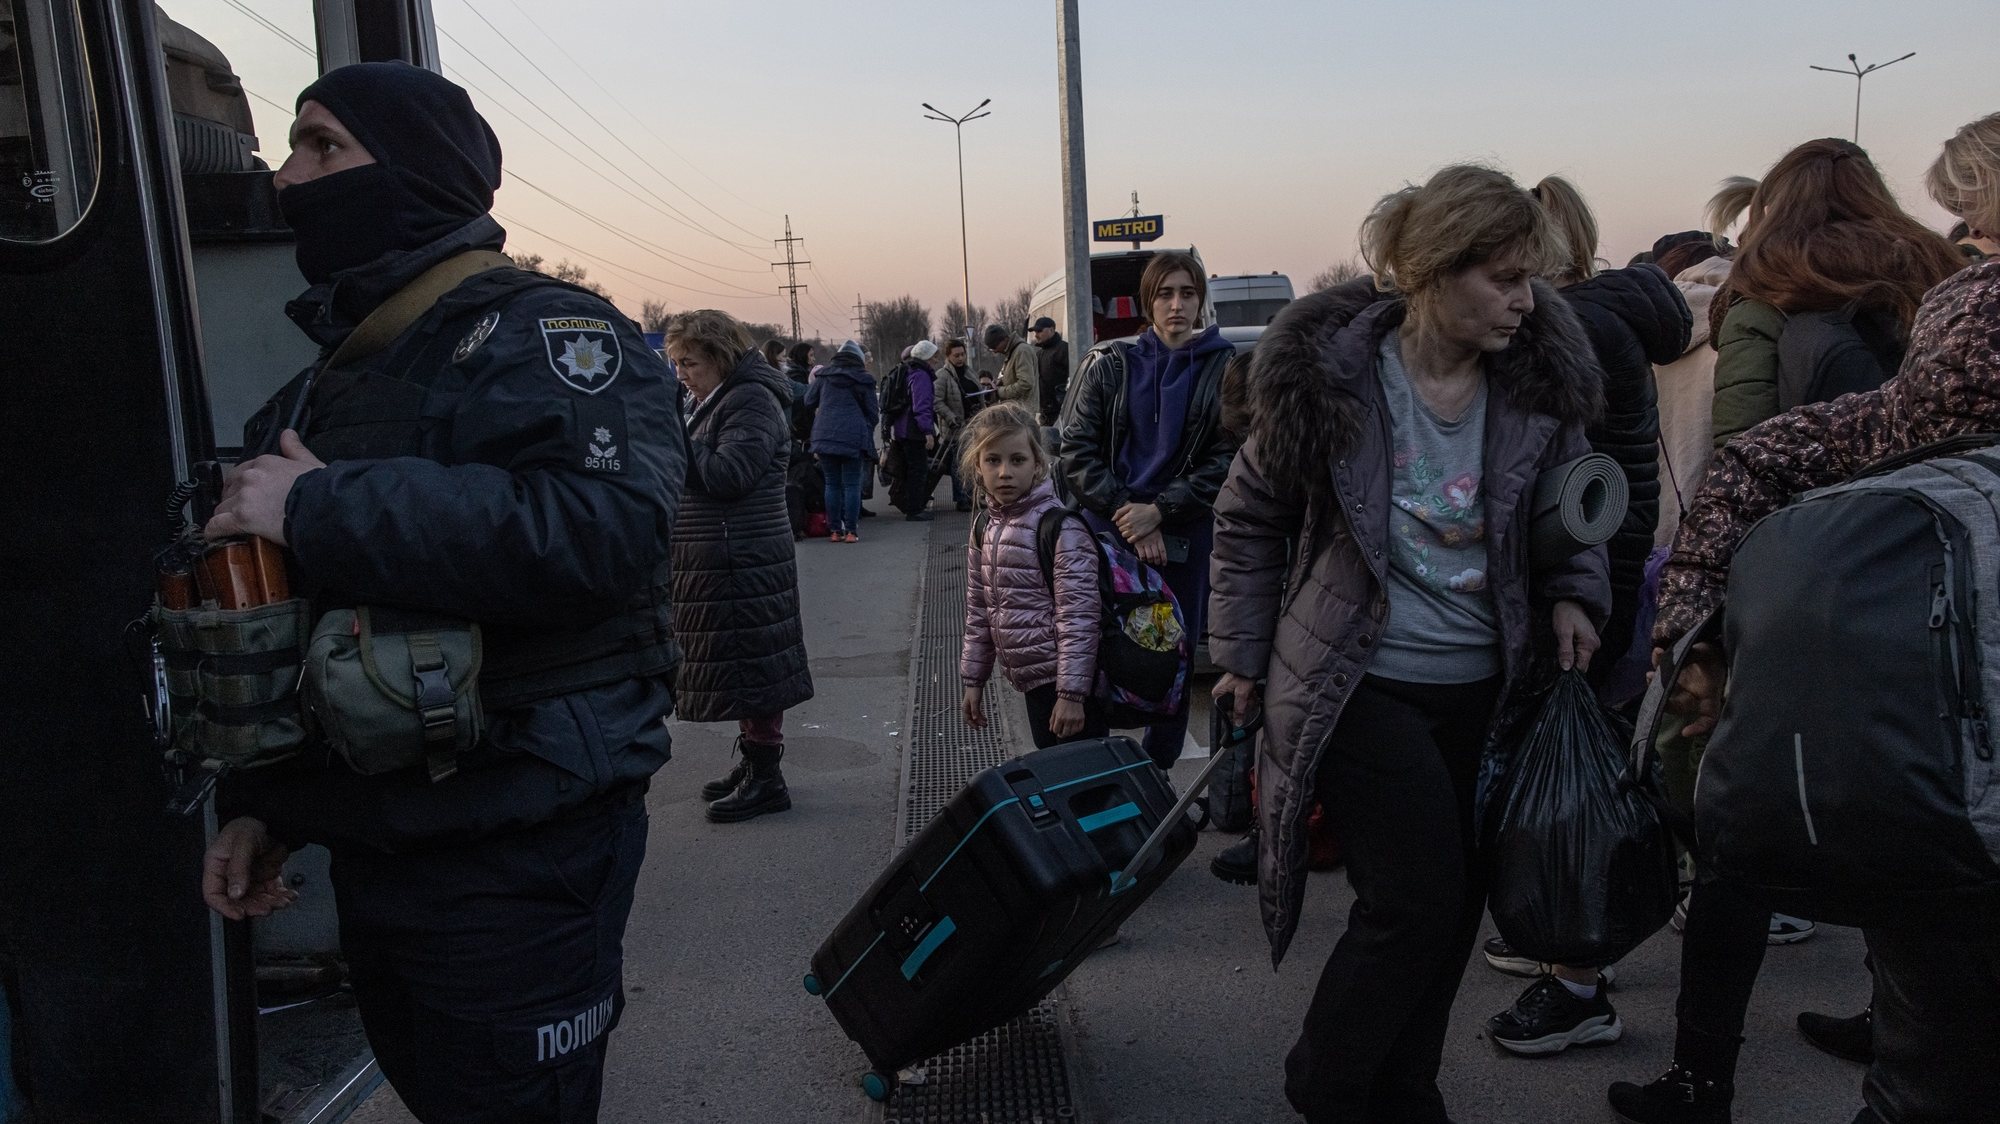 epa09850008 People who fled from the besieged by Russian military southeastern city of Mariupol and occupied Melitopol gather after arriving at the evacuation point in Zaporizhzhia, Ukraine, 25 March 2022. Hundreds of people were evacuated on 25 March from the southeastern cities of Mariupol and Melitopol and arrived in Ukraine&#039;s controlled area by buses and their own cars. Almost 100,000 residents remain trapped and live in &#039;inhuman conditions&#039; without food and water in the ruined city of Mariupol, amid Russia&#039;s &#039;constant shelling&#039;, Ukrainian president Volodymyr Zelenskyy says.  EPA/ROMAN PILIPEY